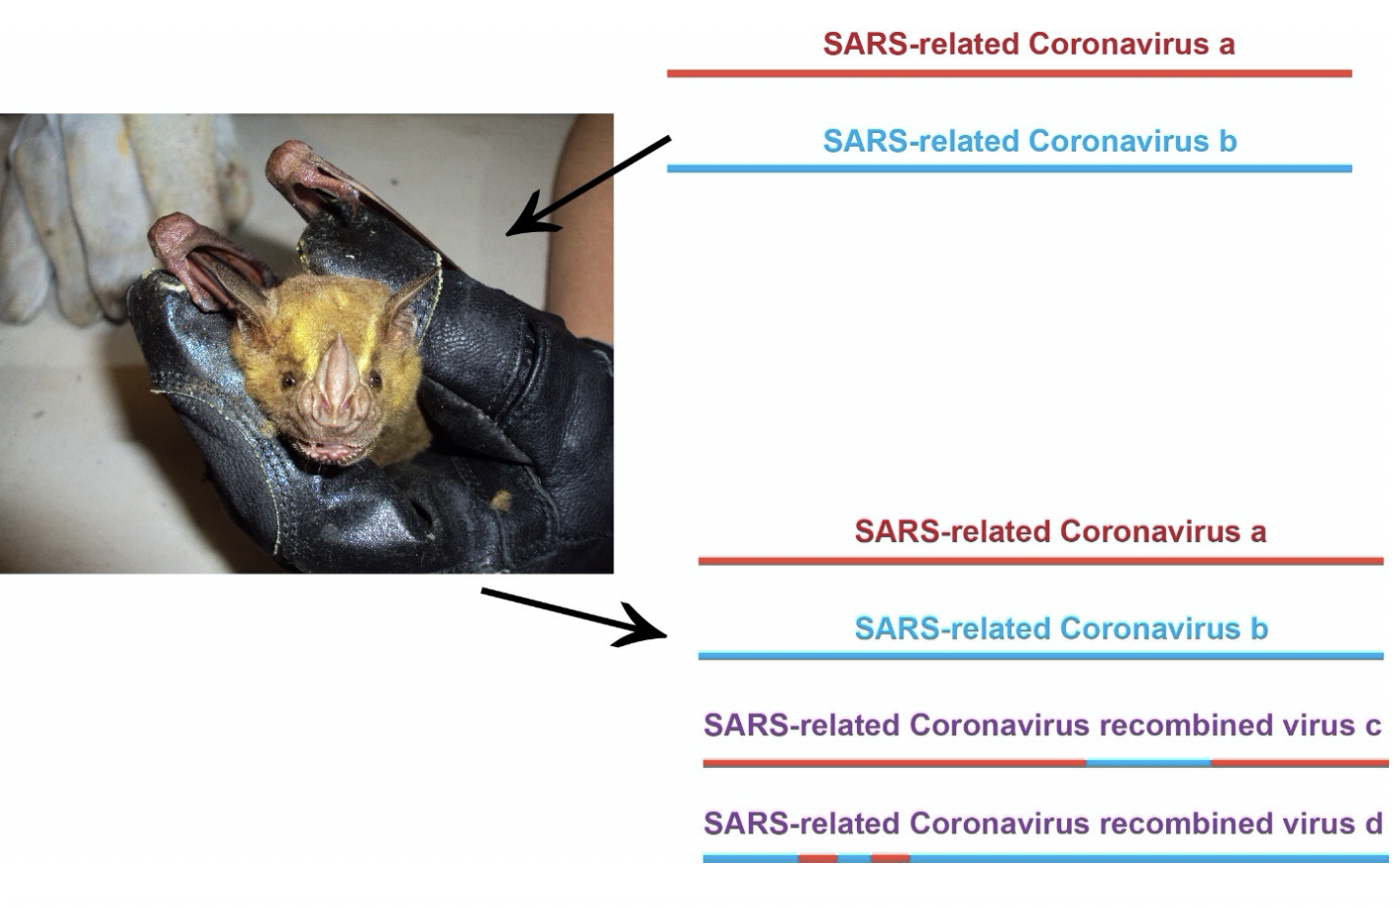 A single bat can carry multiple distinct SARS-related coronaviruses. Inside of the bat, the individual viruses can propagate and be secreted, sustaining a transmission cycle. However, the simultaneously present SARS-related coronaviruses can also sw…